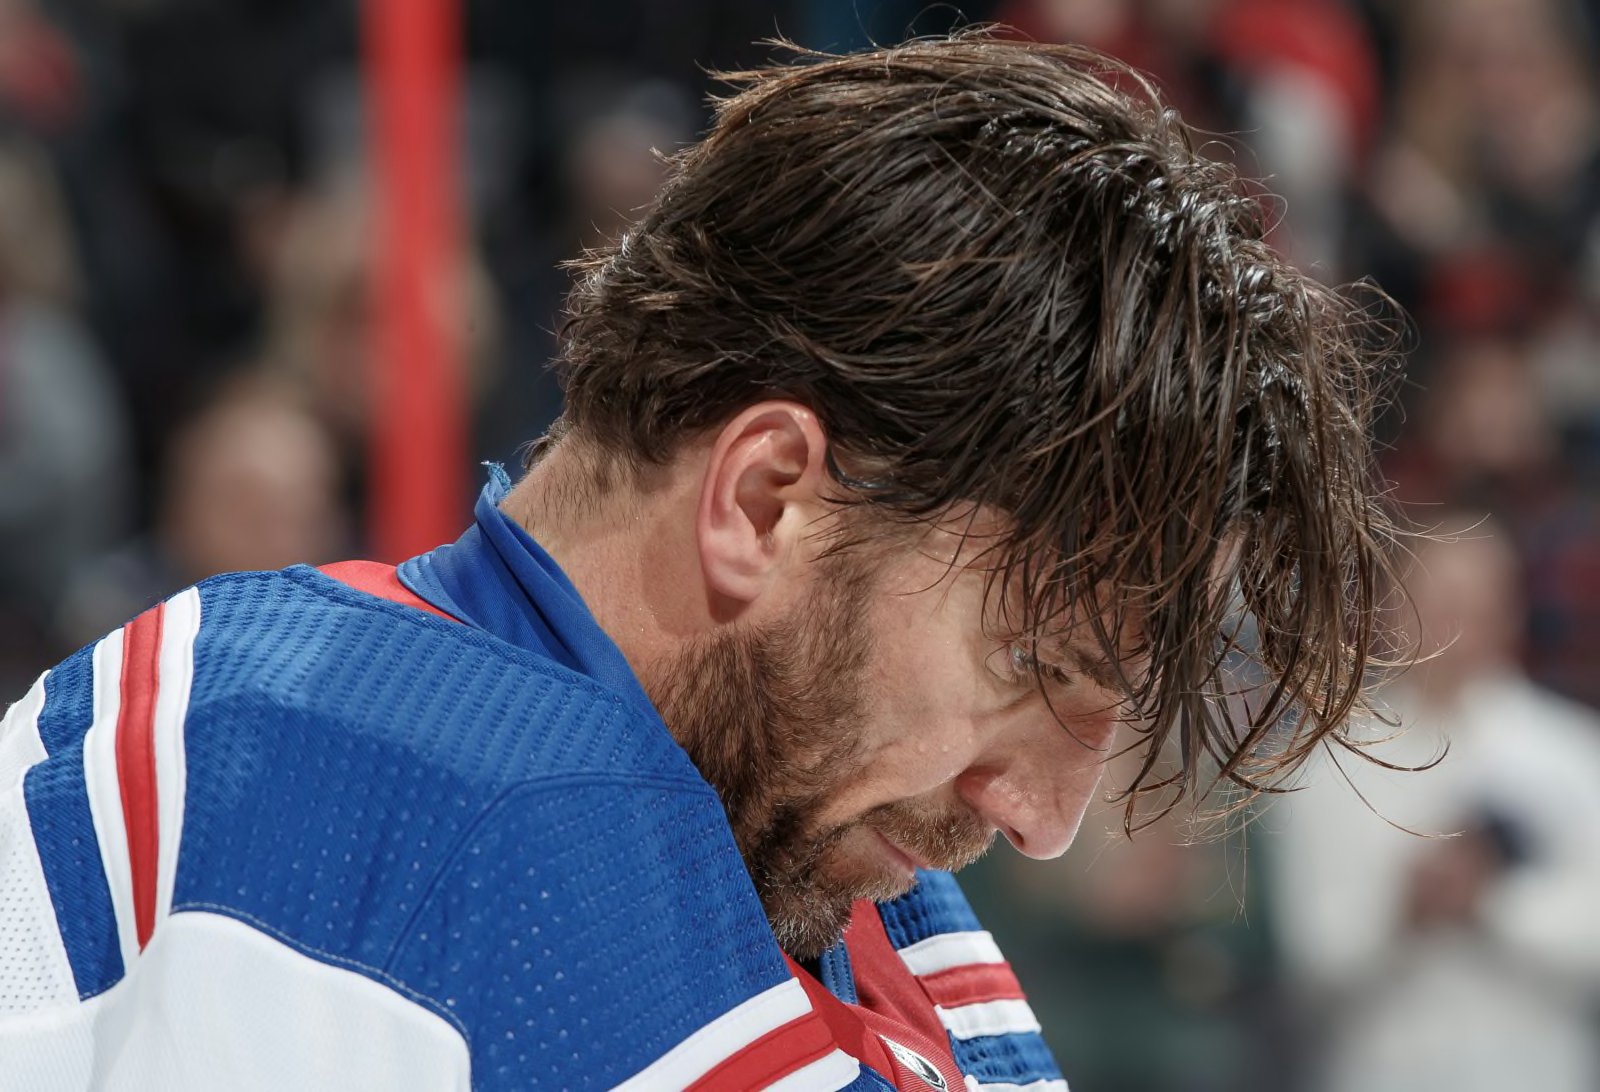 Rangers to buyout Henrik Lundqvist, Remembering an all-time New York Ranger